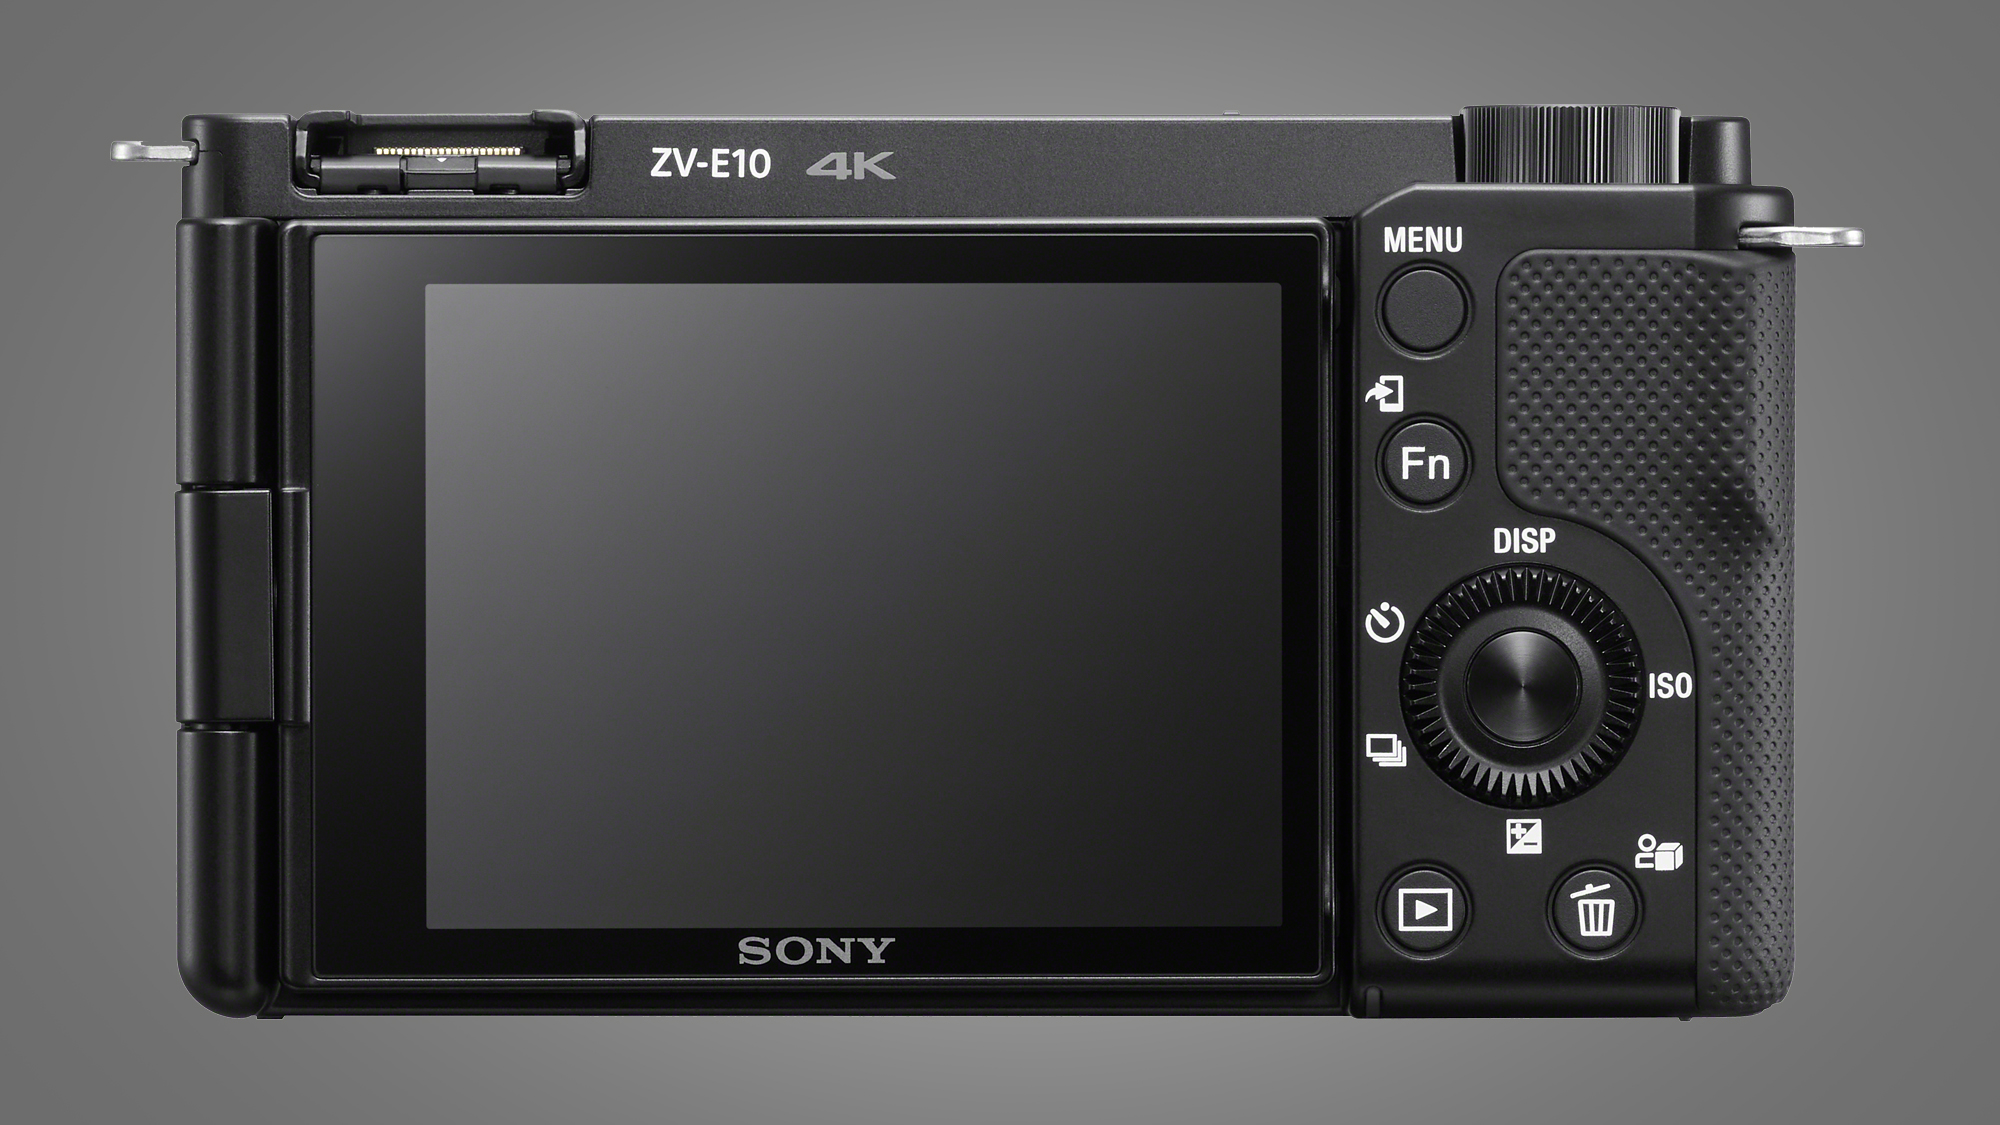 The rear screen and controls of the Sony ZV-E10 vlogging camera